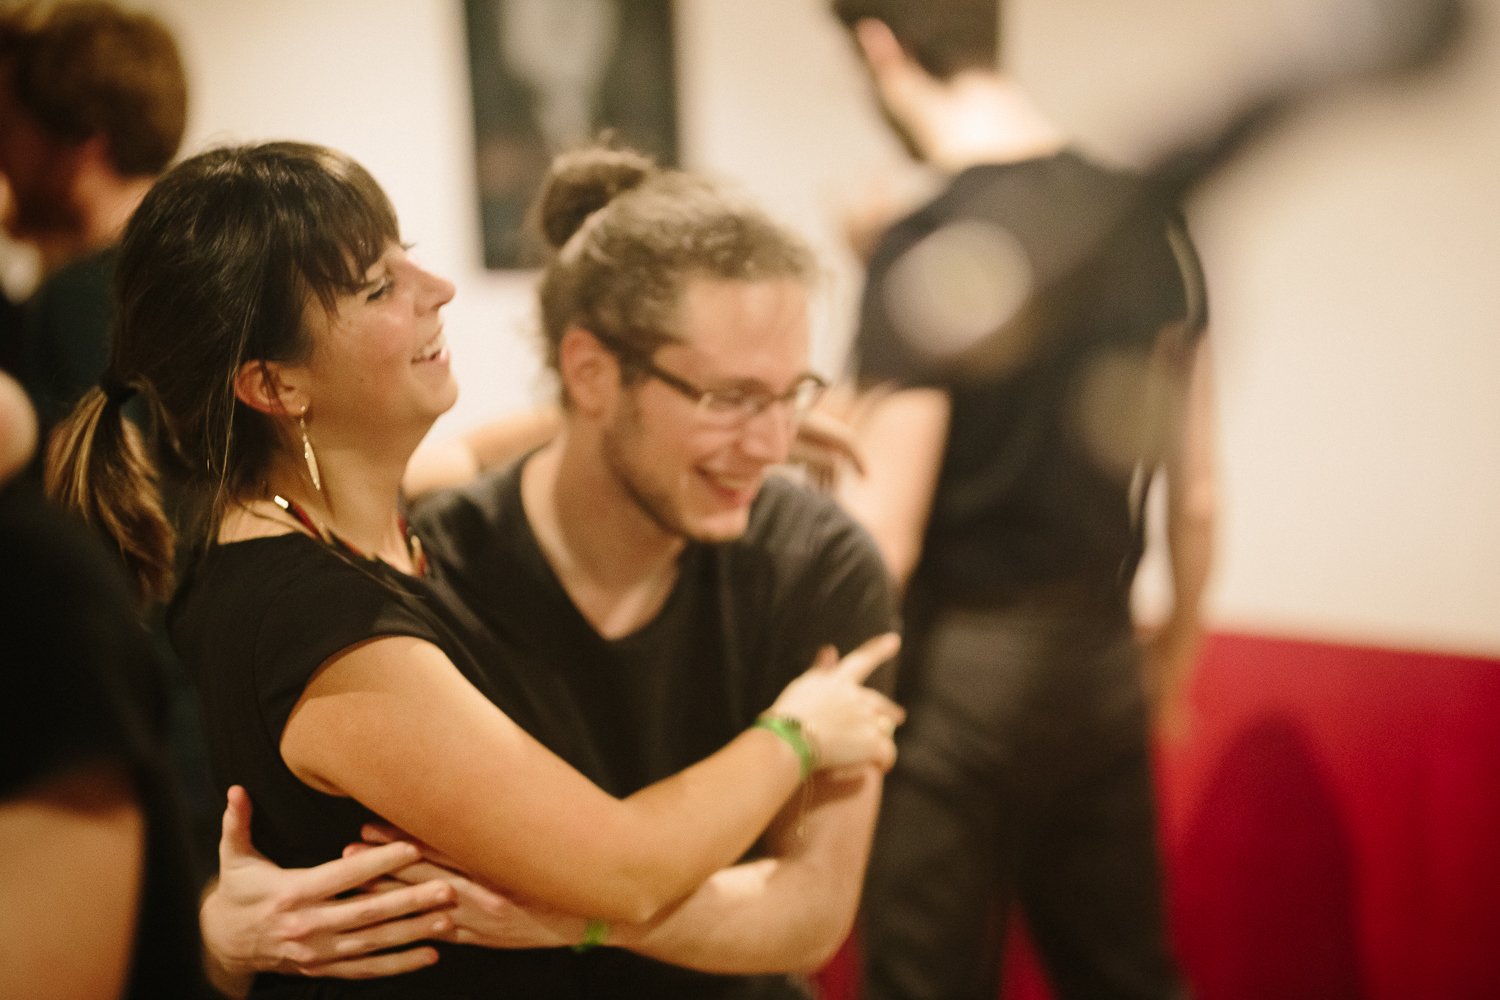  Paris Swing Workshop 2018, Saturday Night Party with the Jacks'&'Jills - Photo Credit: For Dancers Only (http://d.pr/1fEEY) - http://www.ebobrie.com/paris-swing-workshop-27012018-au-chantier 